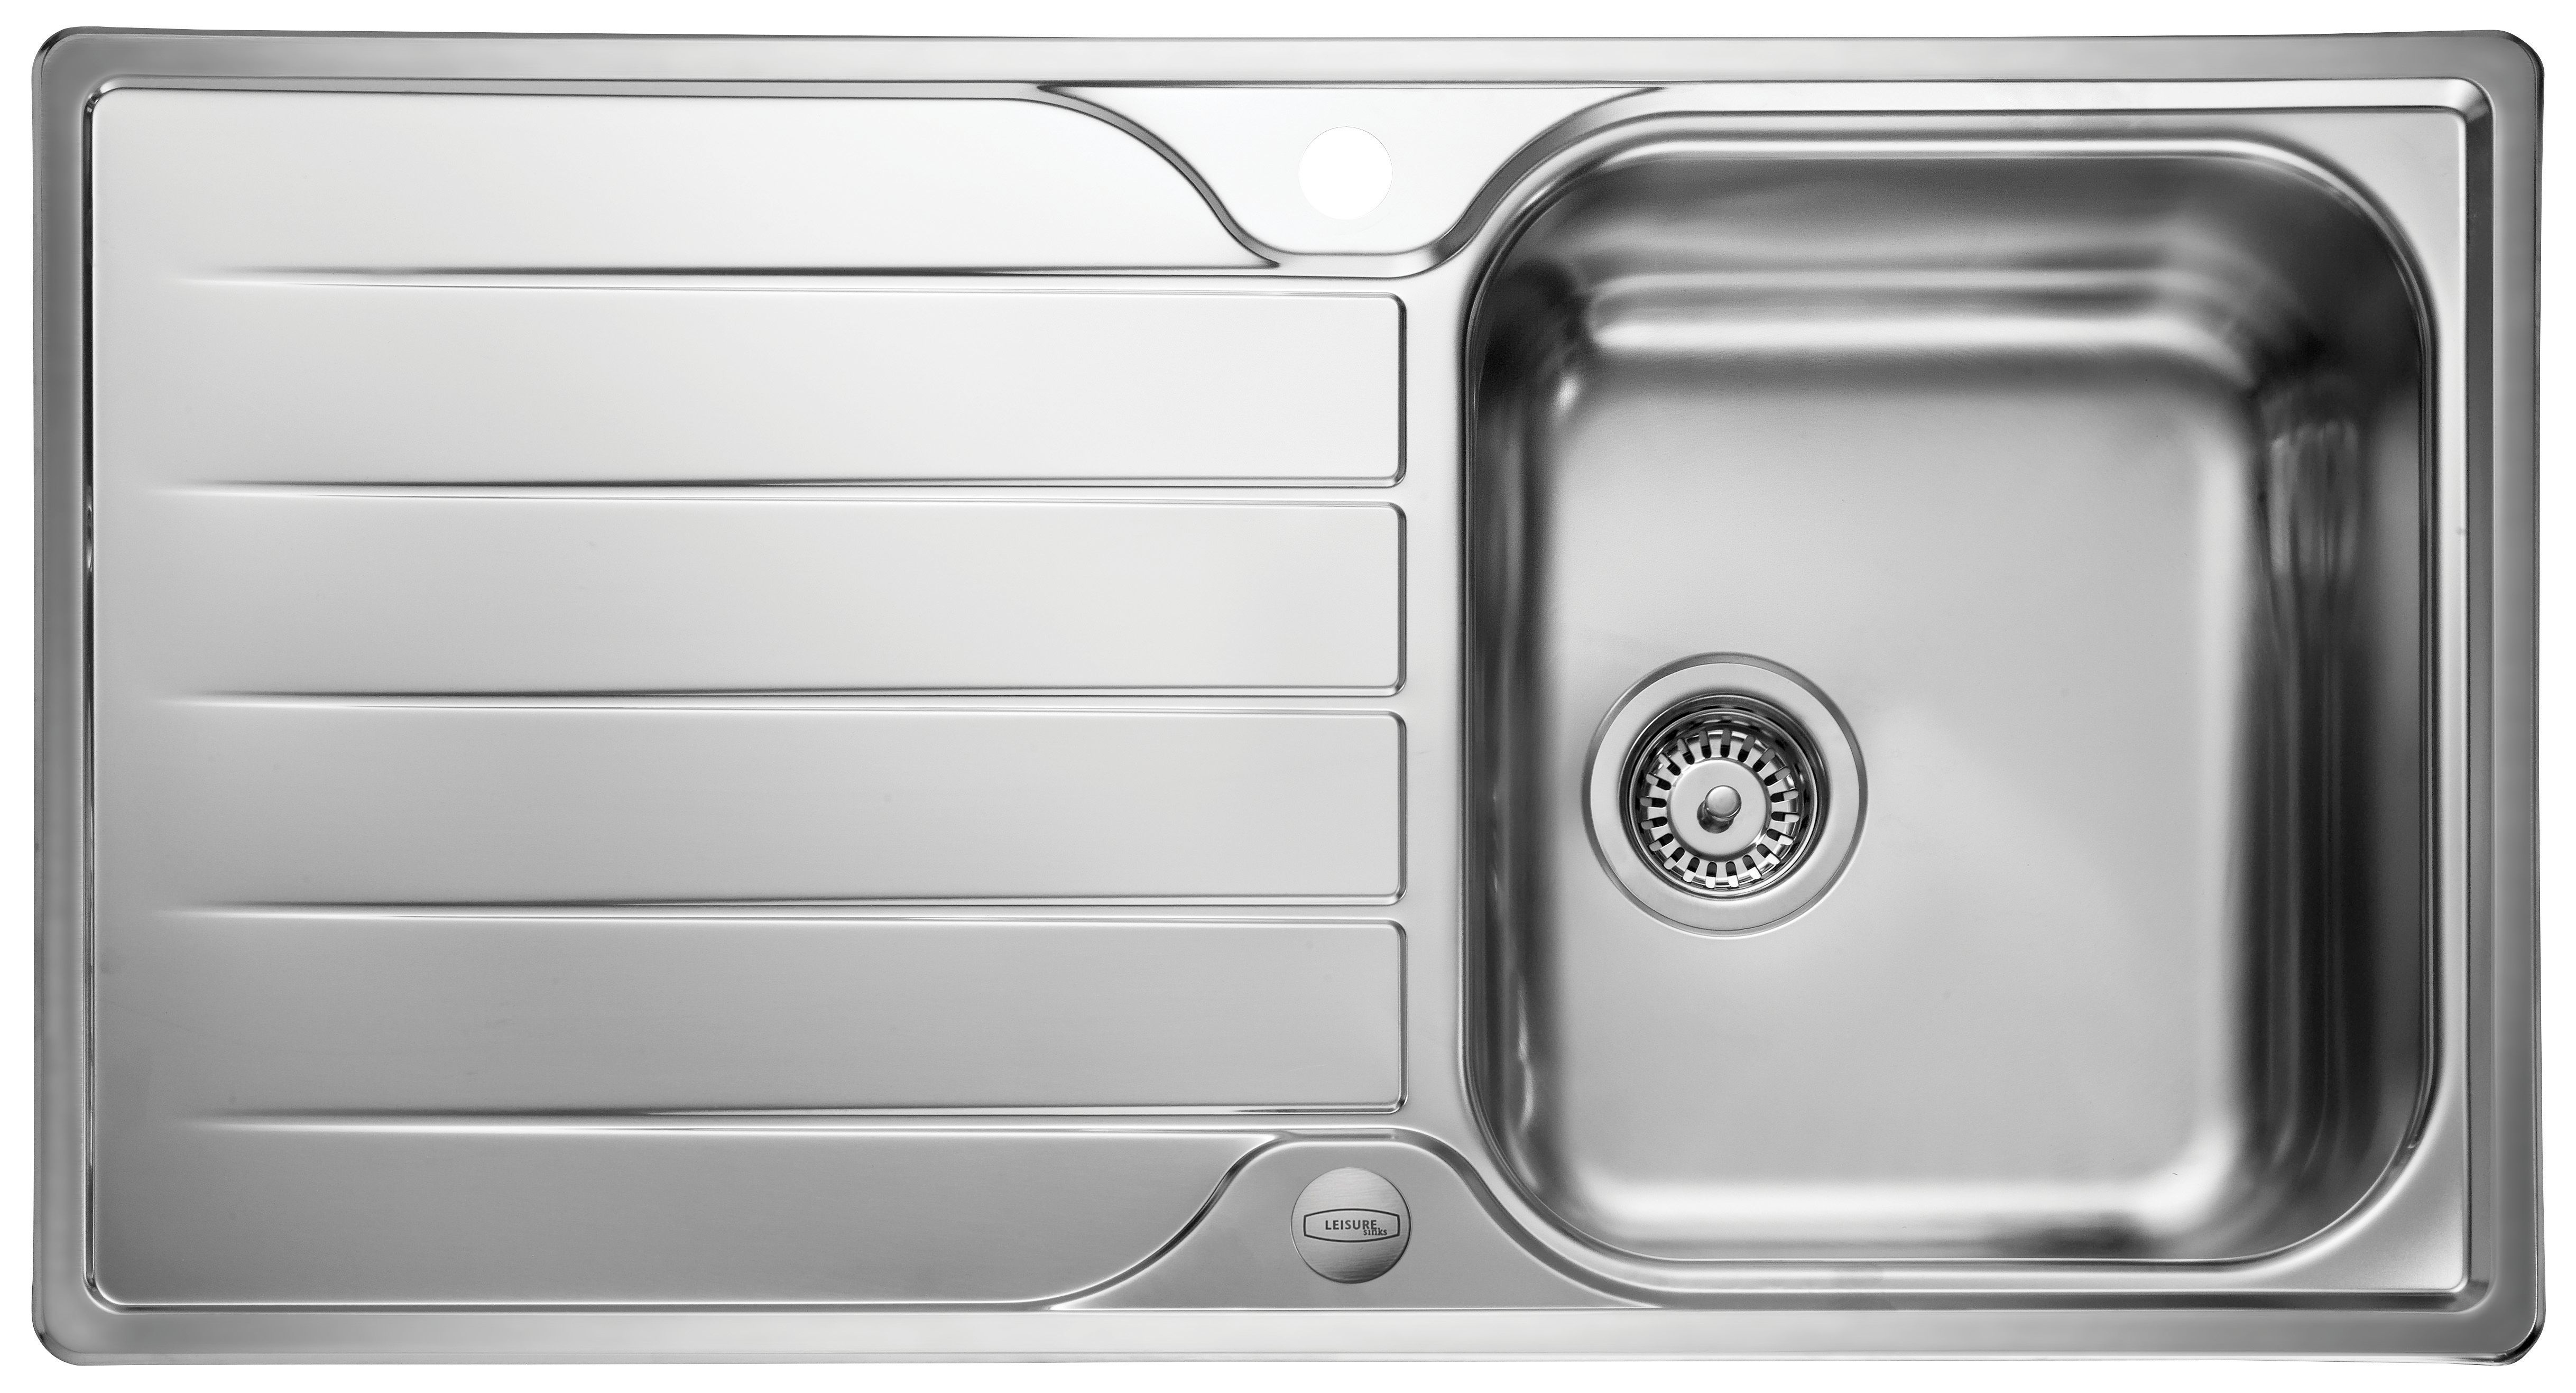 Leisure Albion 1 Bowl Reversible Inset Kitchen Sink - Stainless Steel